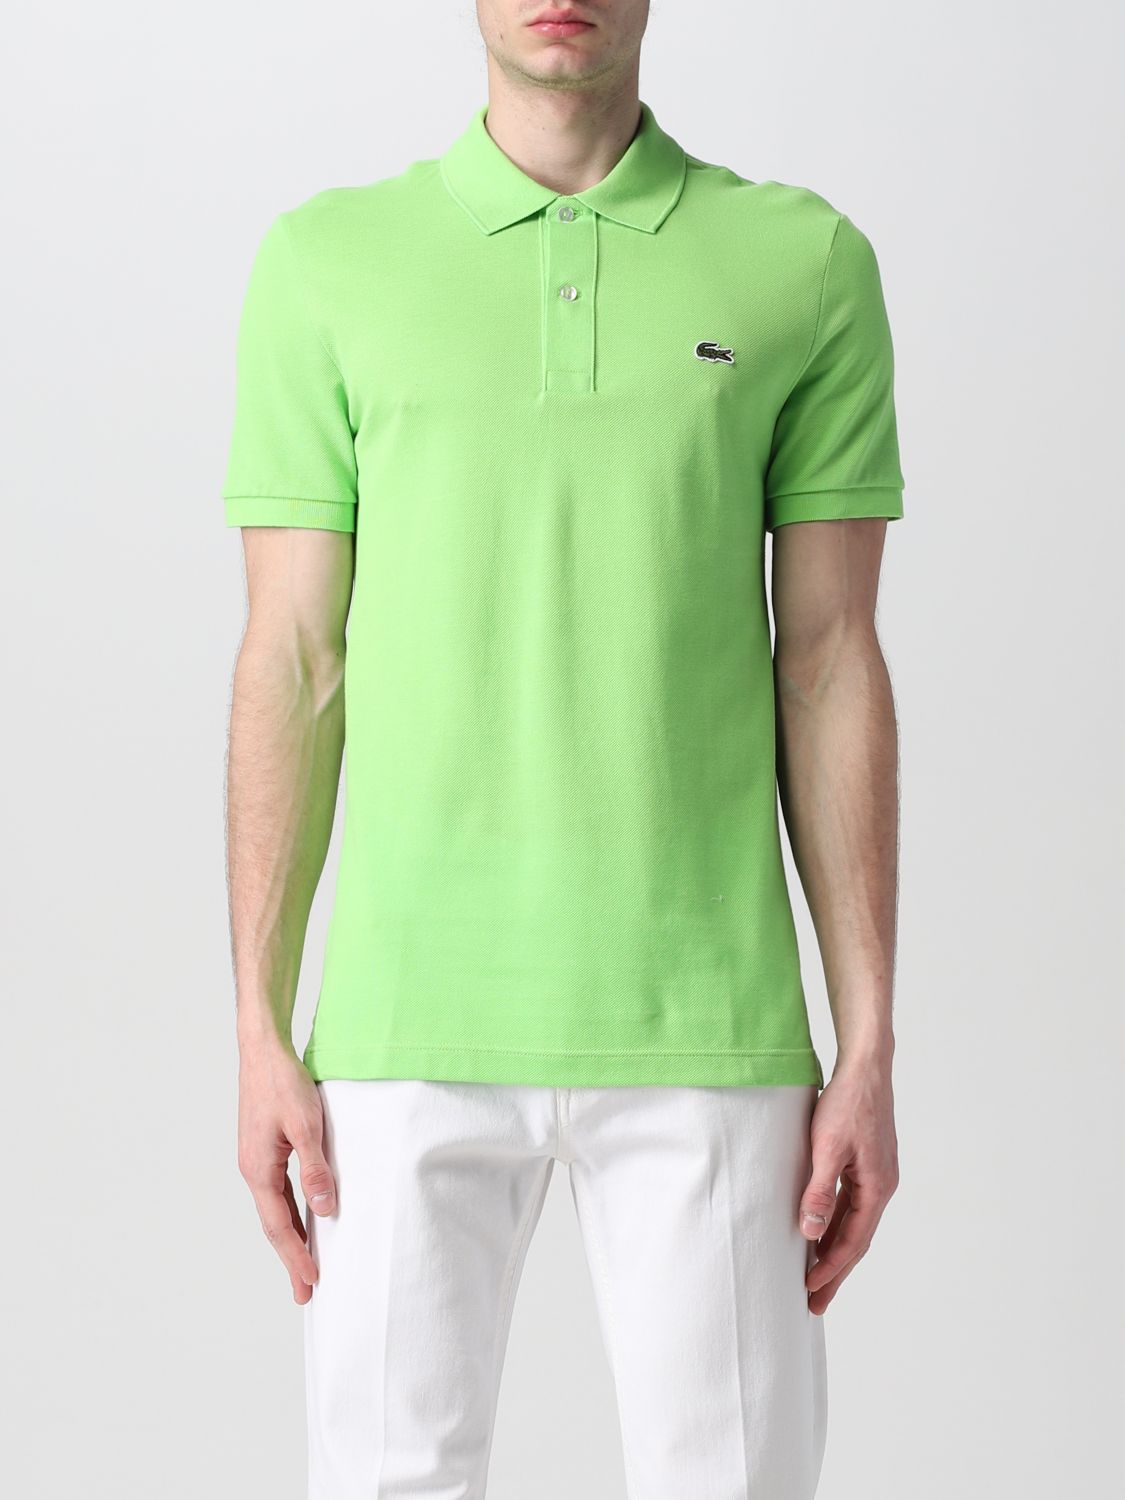 Lacoste Outlet: basic shirt with logo - Forest Green | Lacoste polo shirt PH4012 on GIGLIO.COM